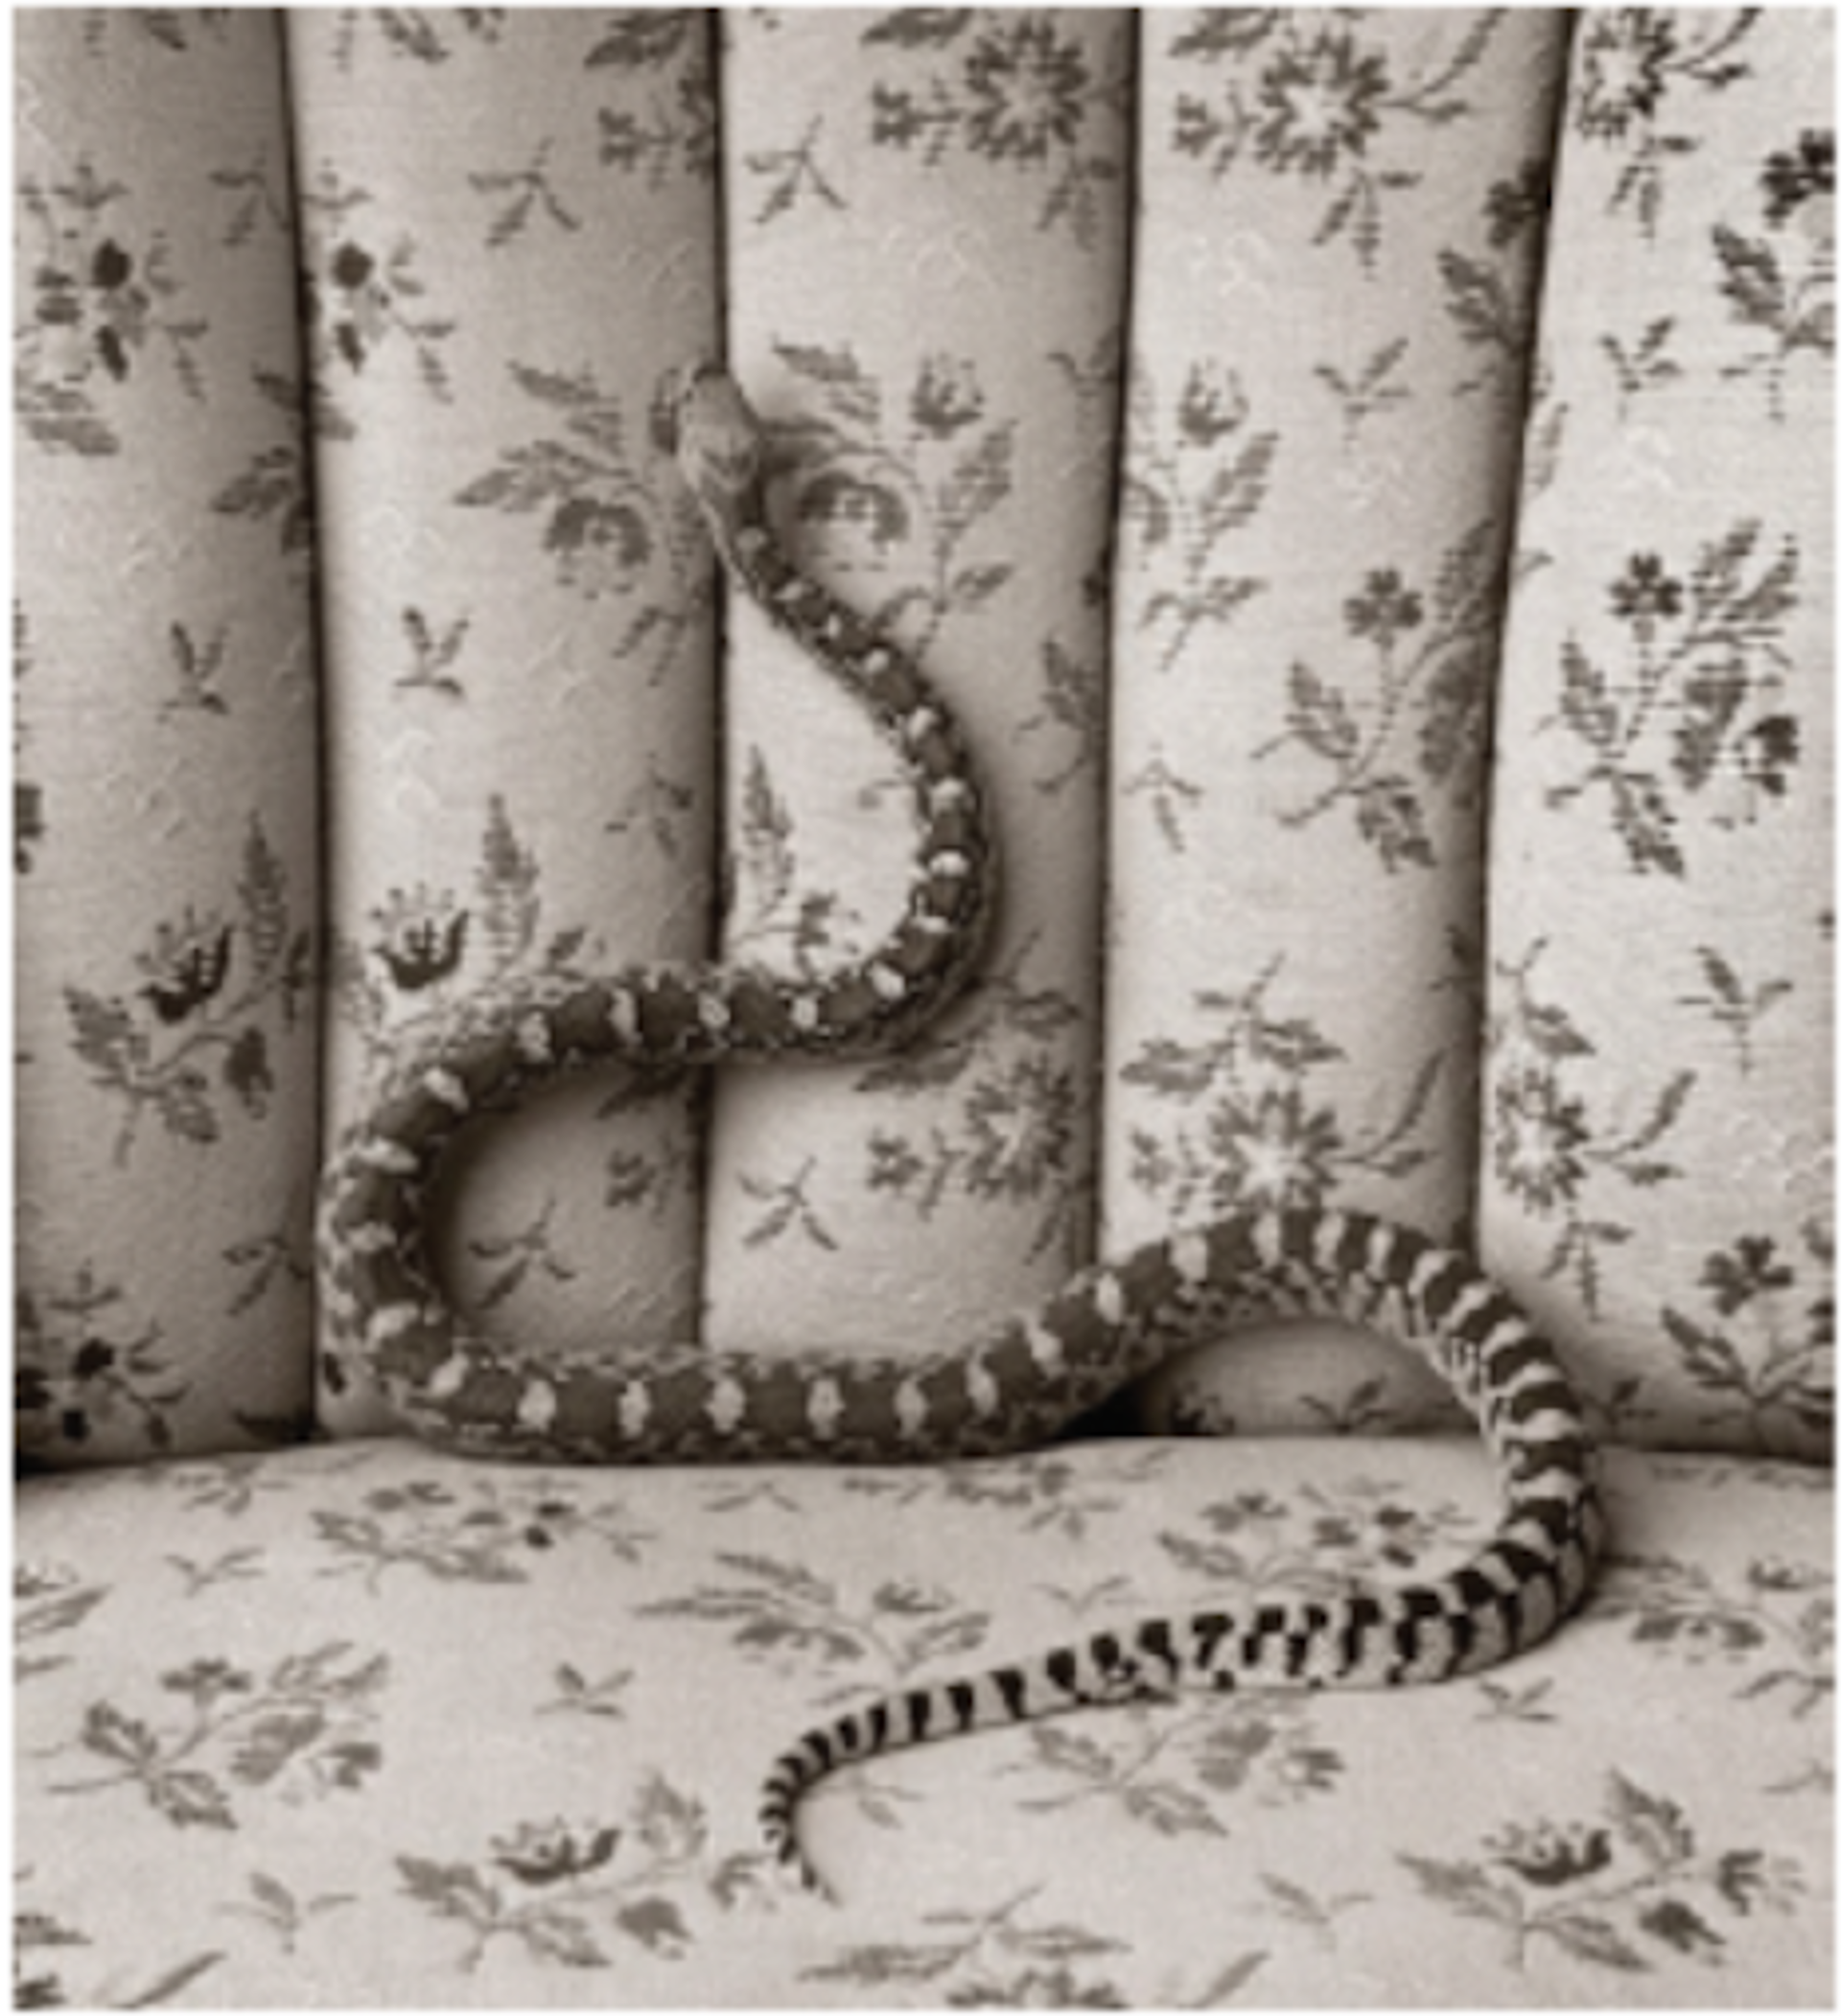 Bull Snake on Couch by James H. Evans